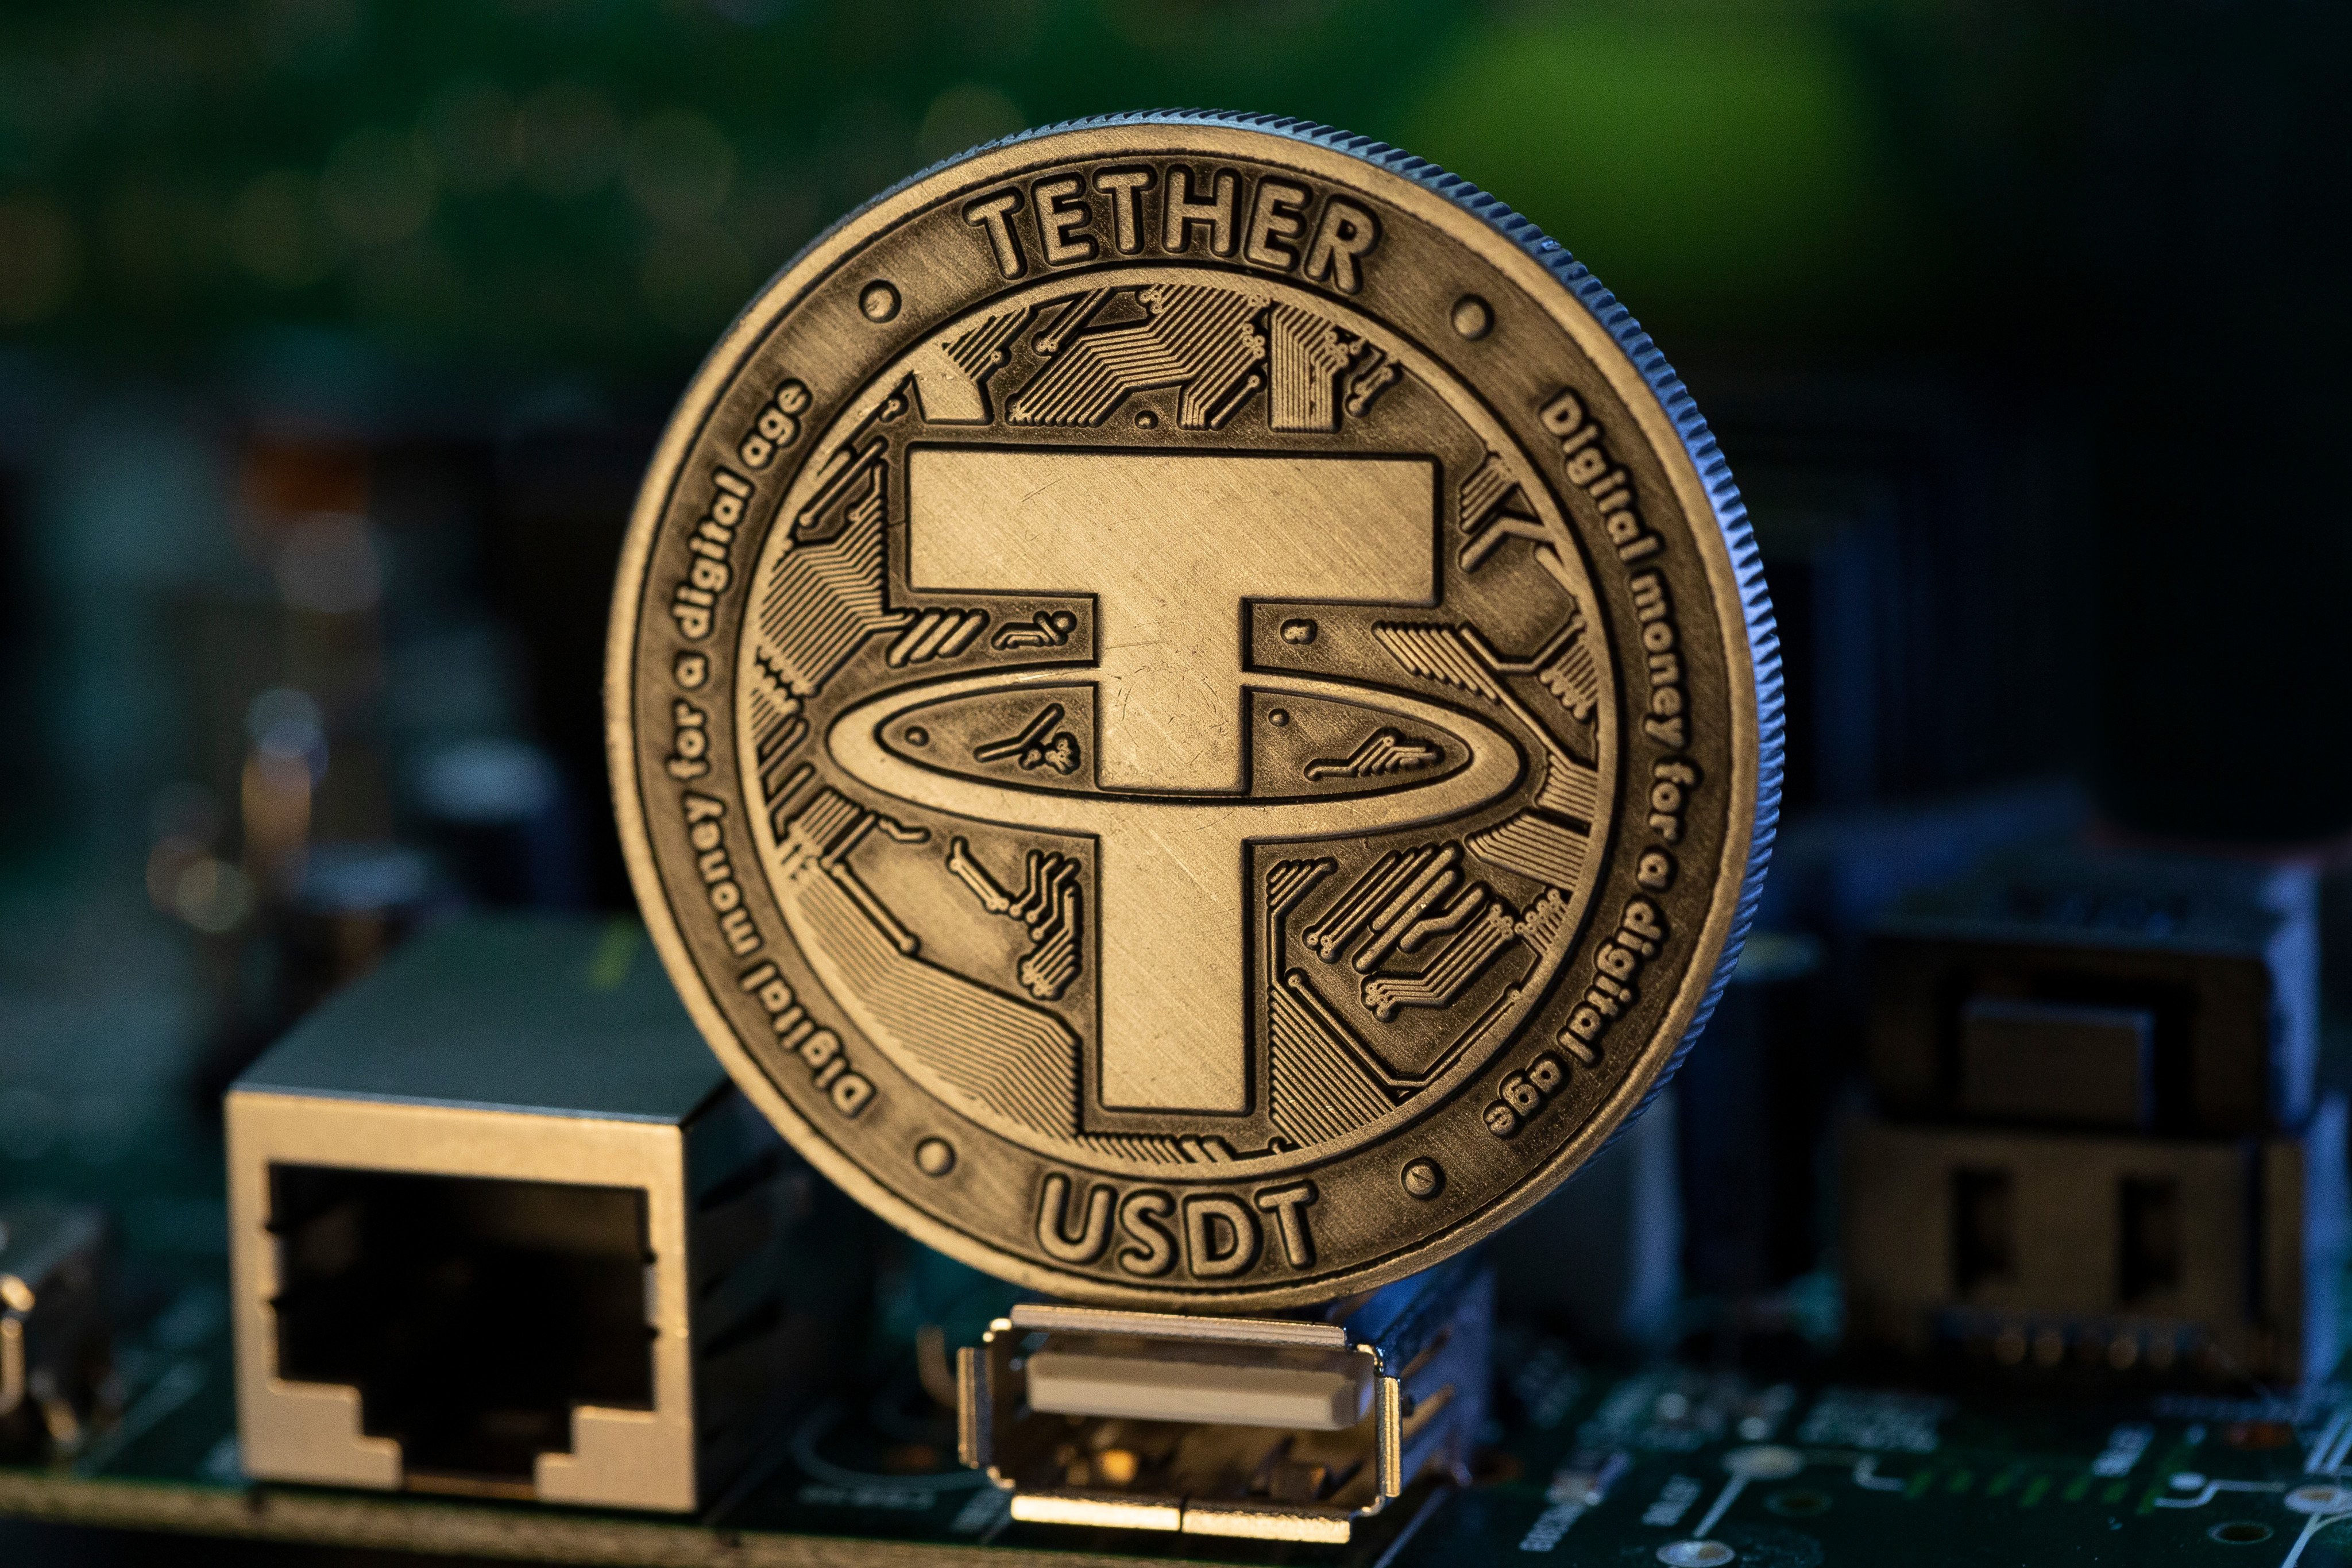 China’s prosecutor’s office and forex regulator highlighted cases where the Tether stablecoin was used as an intermediary to trade yuan with other currencies. Photo: Shutterstock